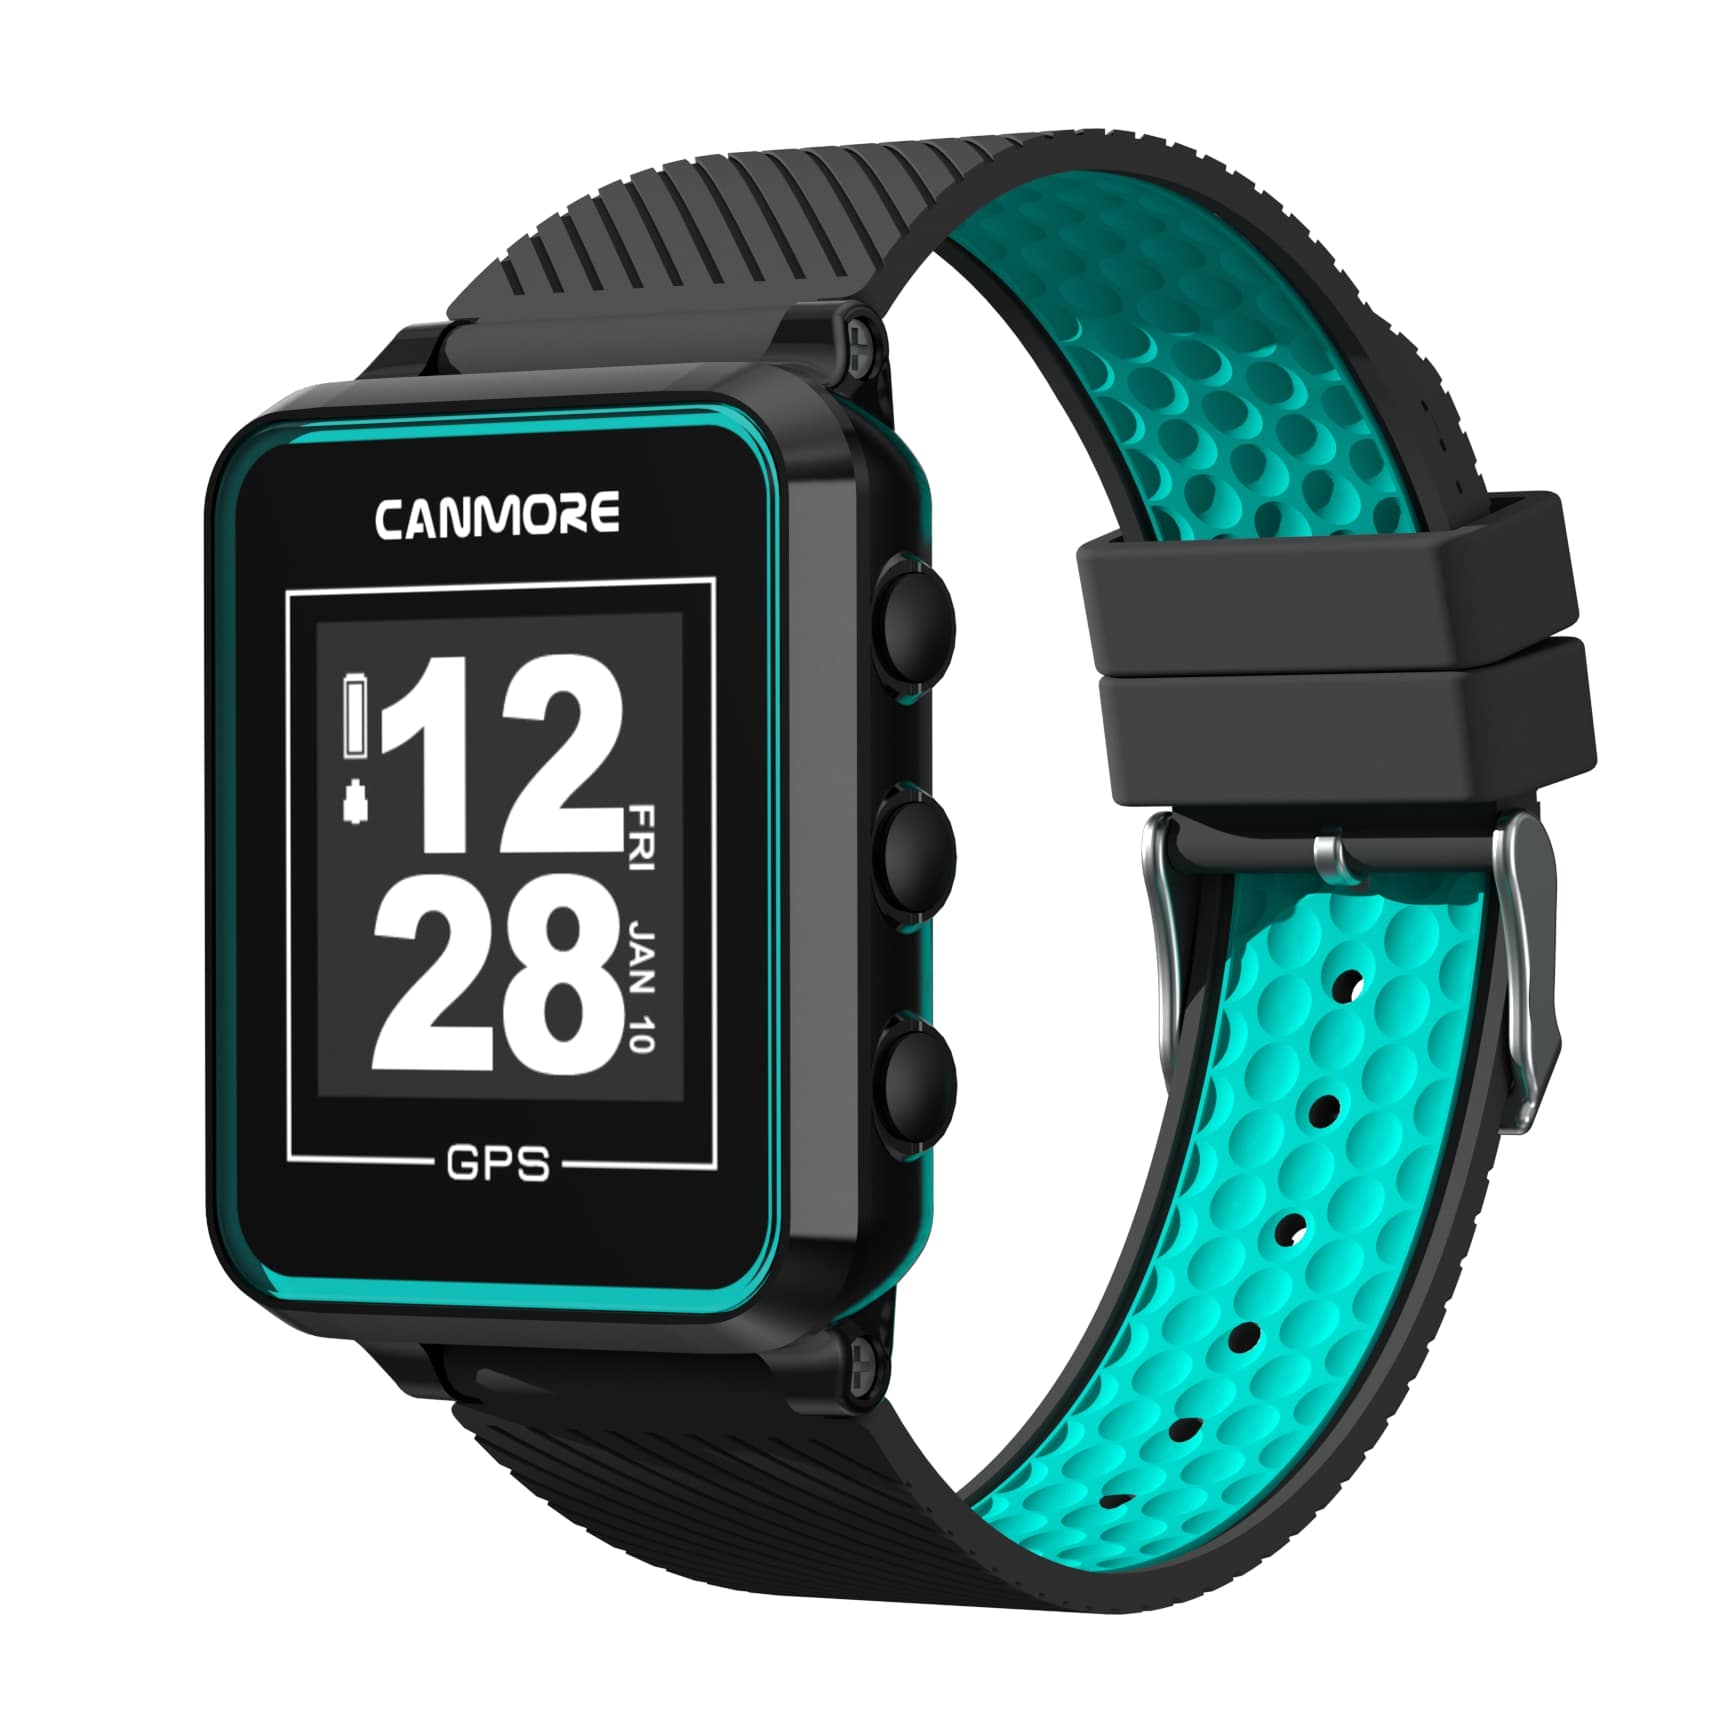 Canmore TW-353 GPS Watch